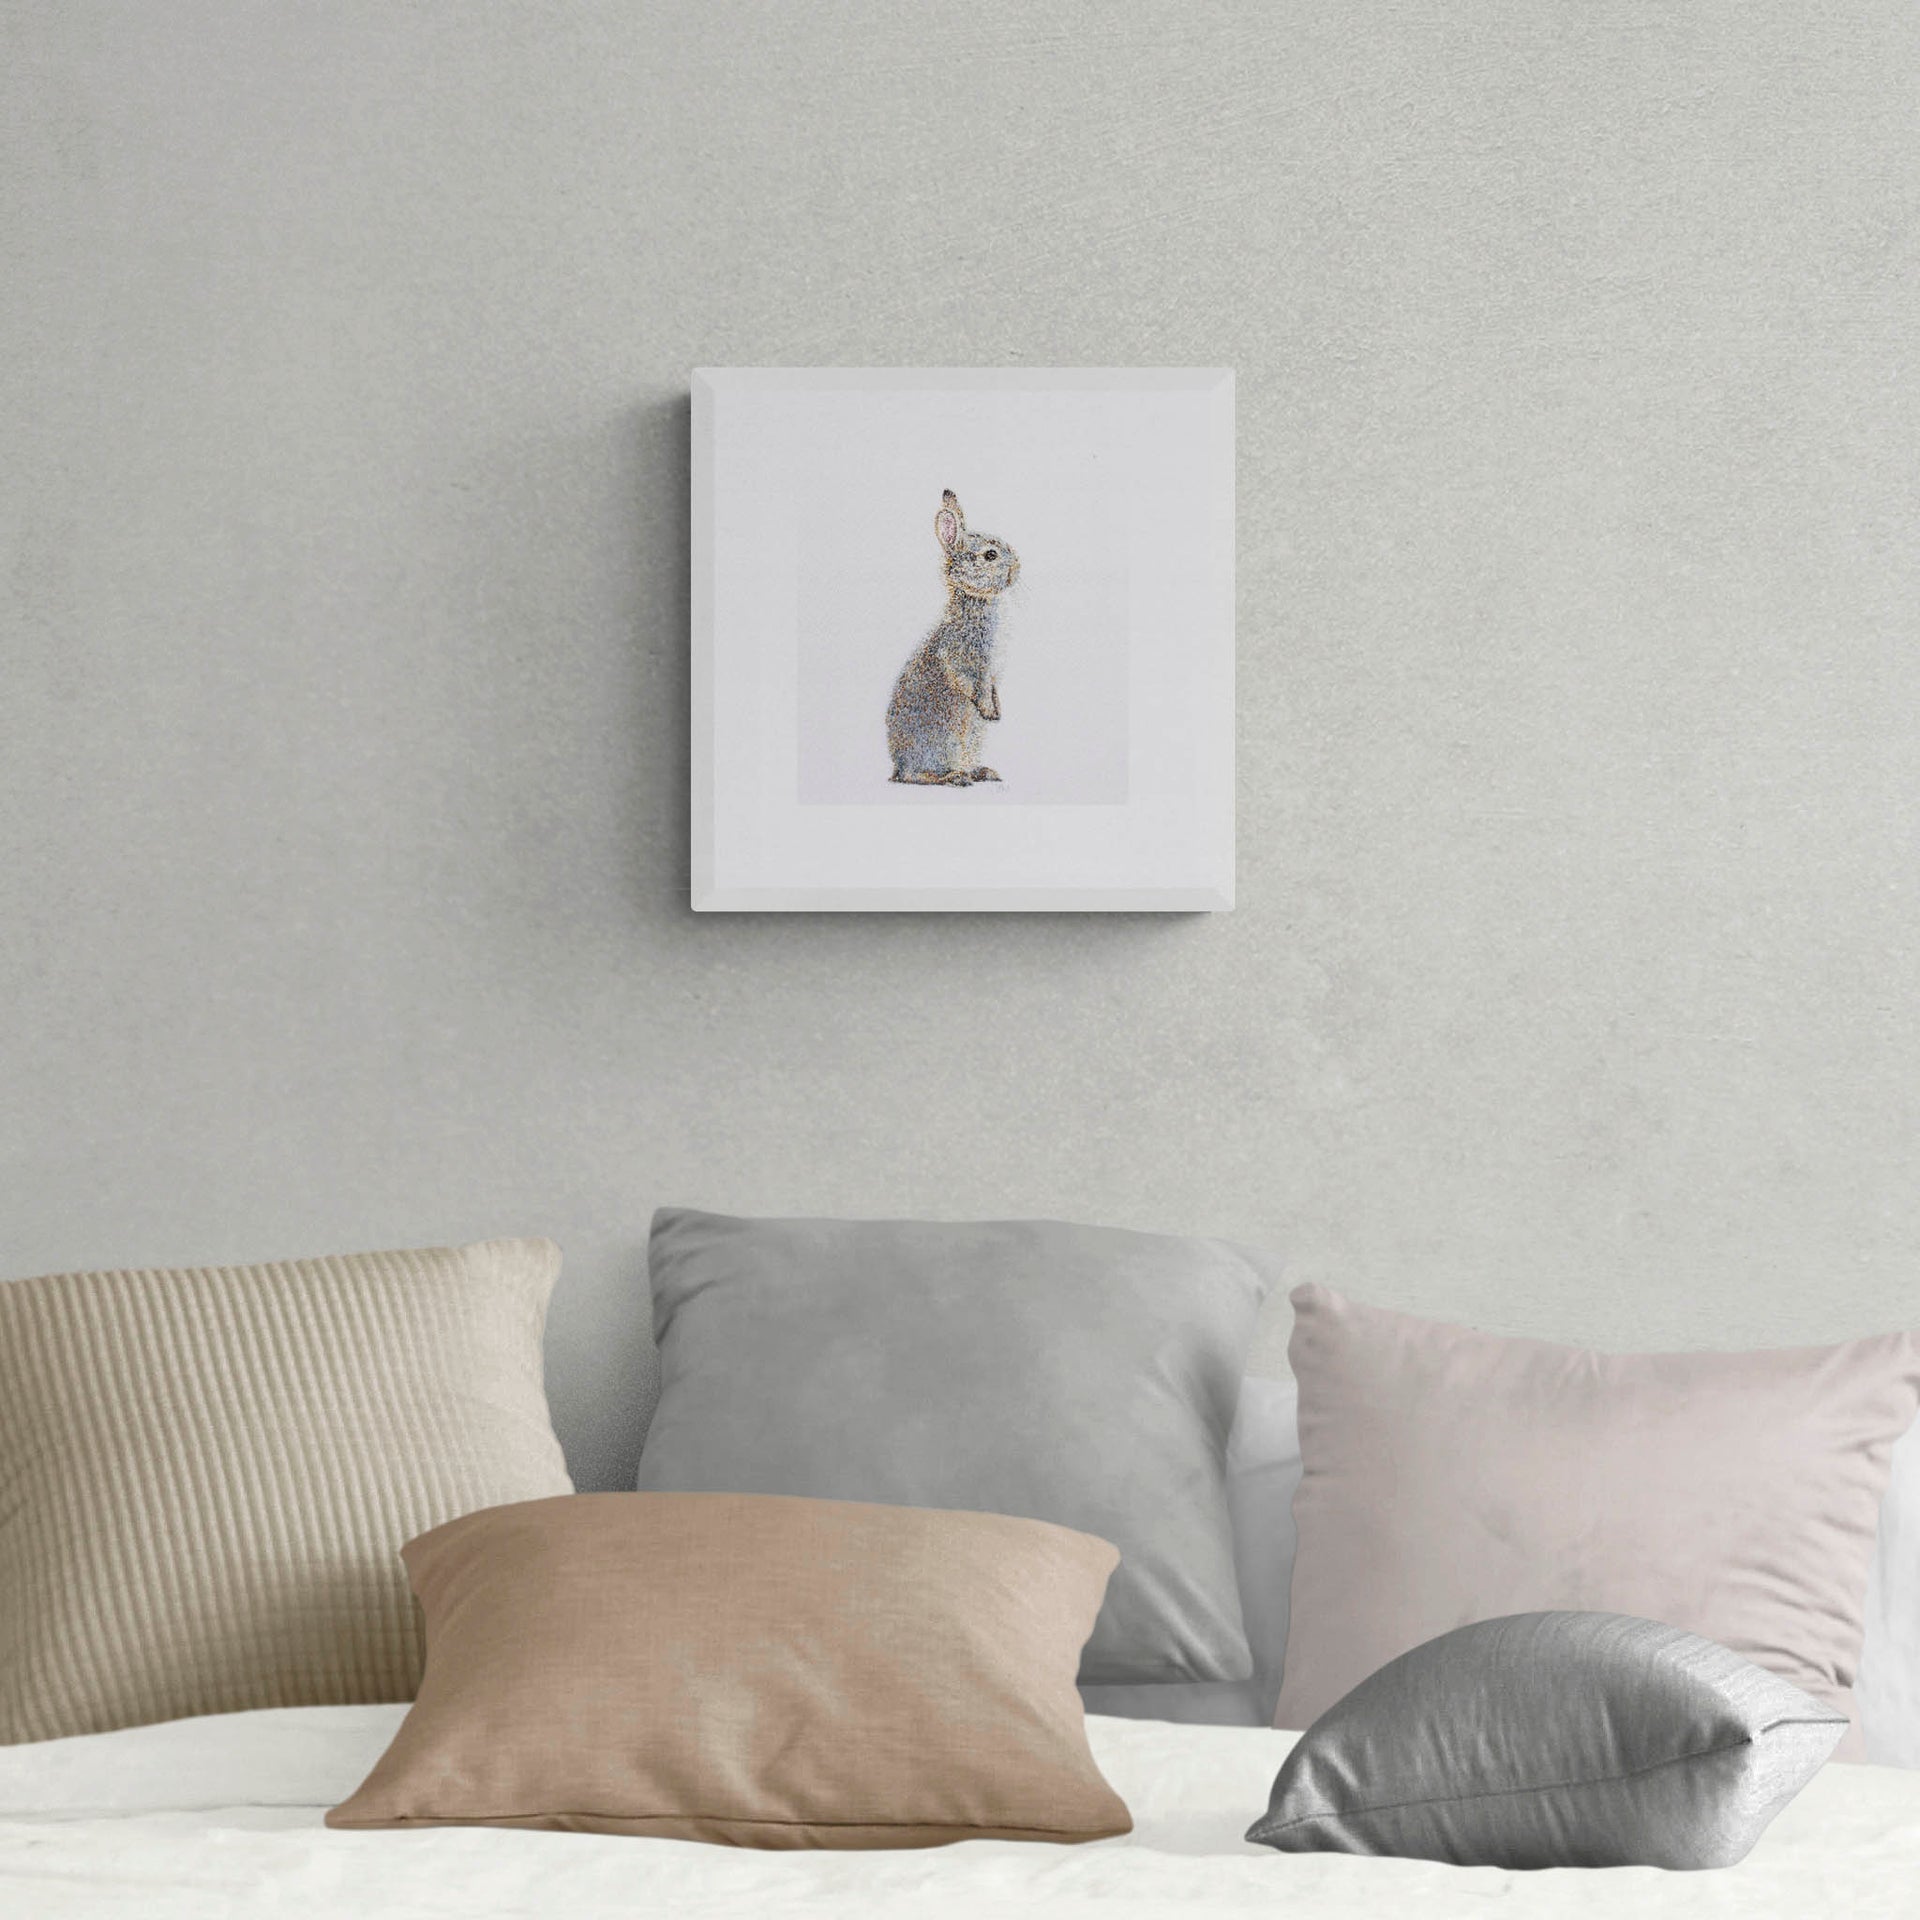 Hand embroidered bunny limited edition print on wall